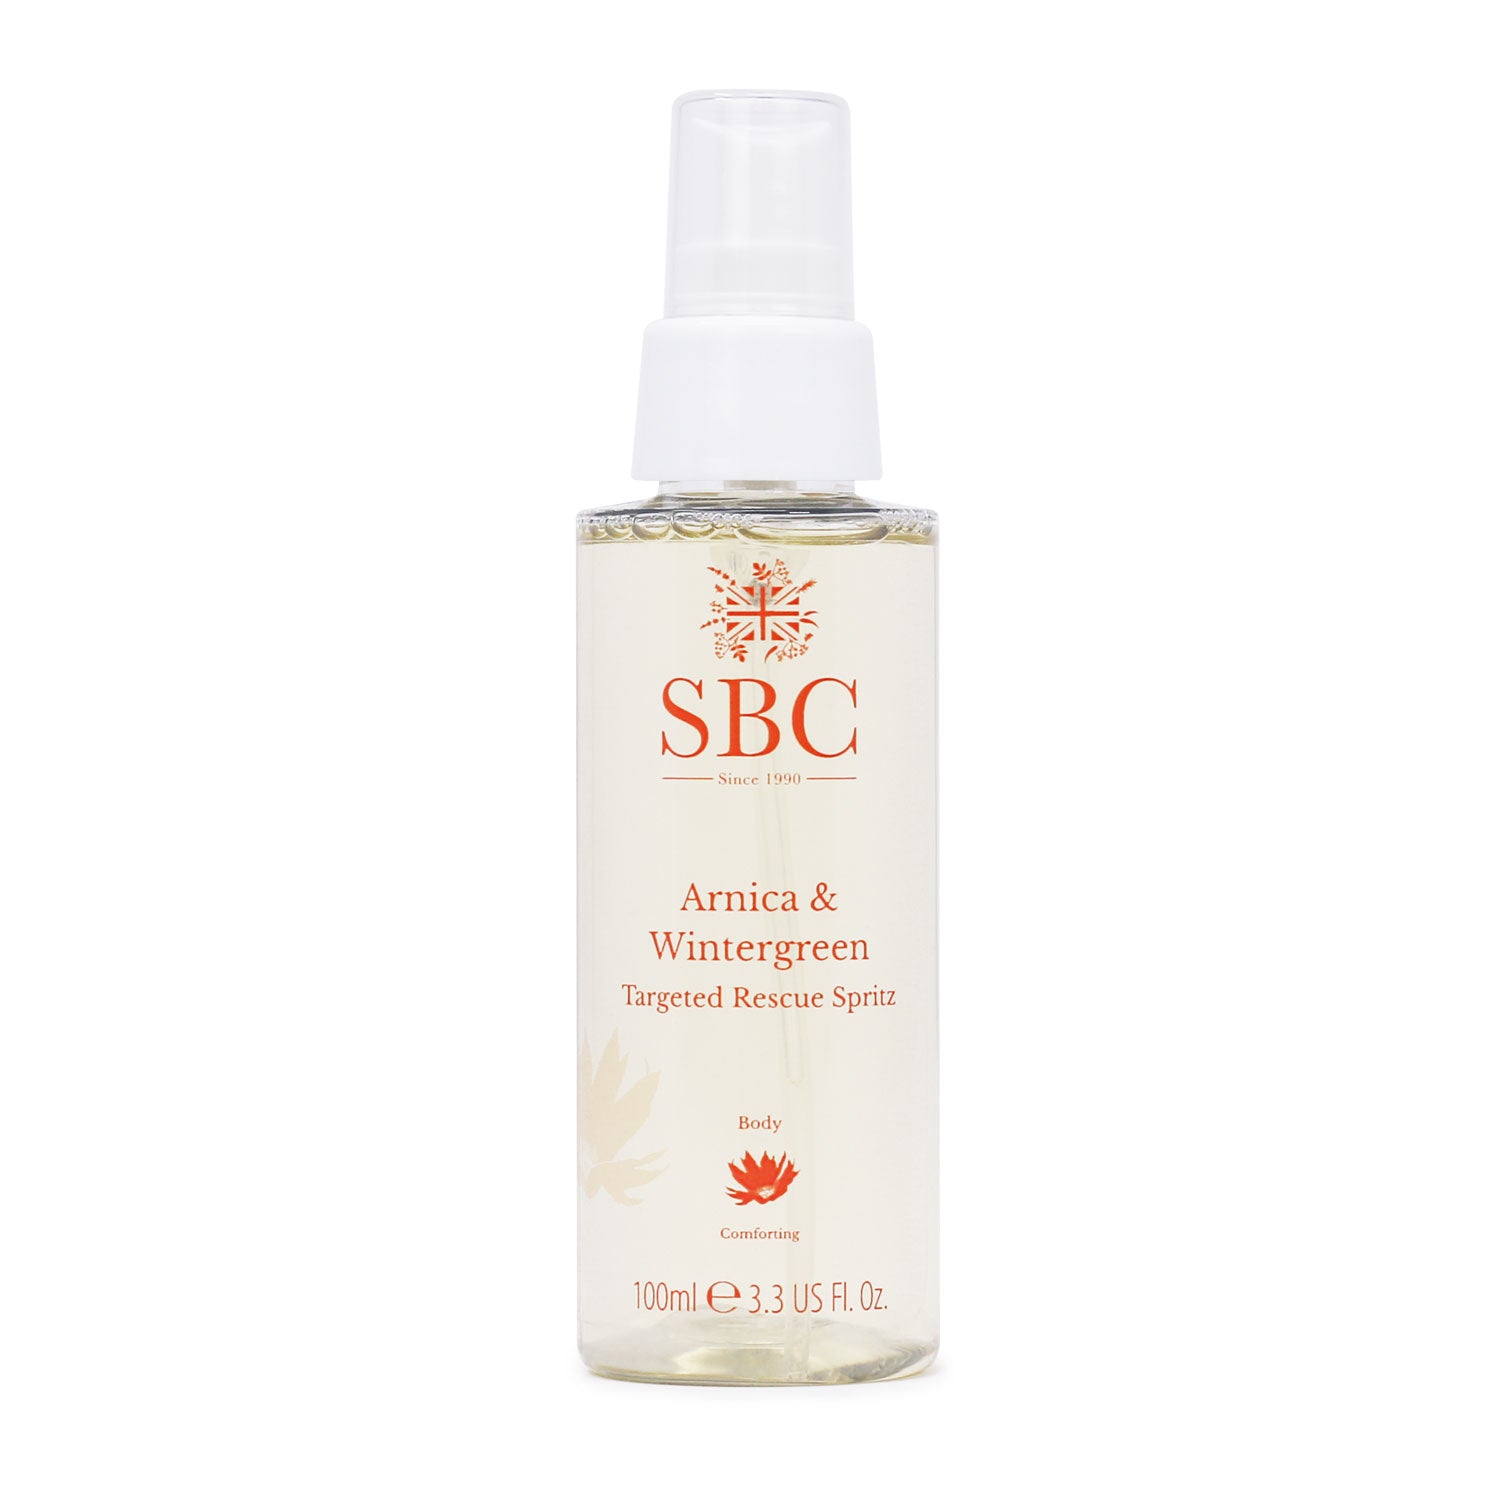 SBC Skncare Arnica & Wintergreen Targeted Rescue Spritz